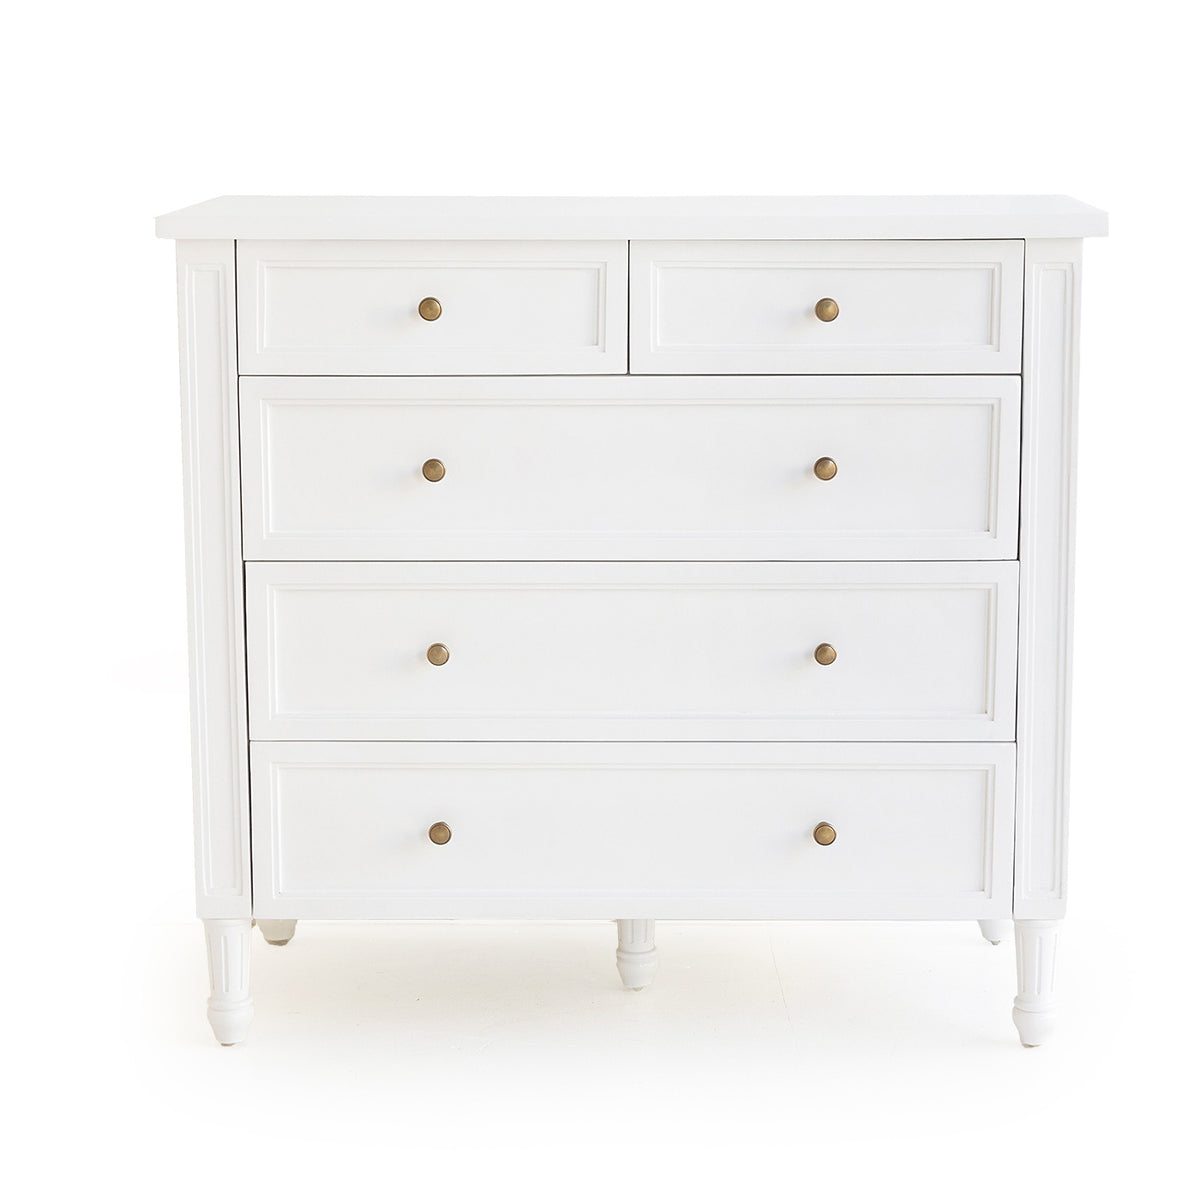 Percy Timber Dresser with 5 Drawer - White - Notbrand